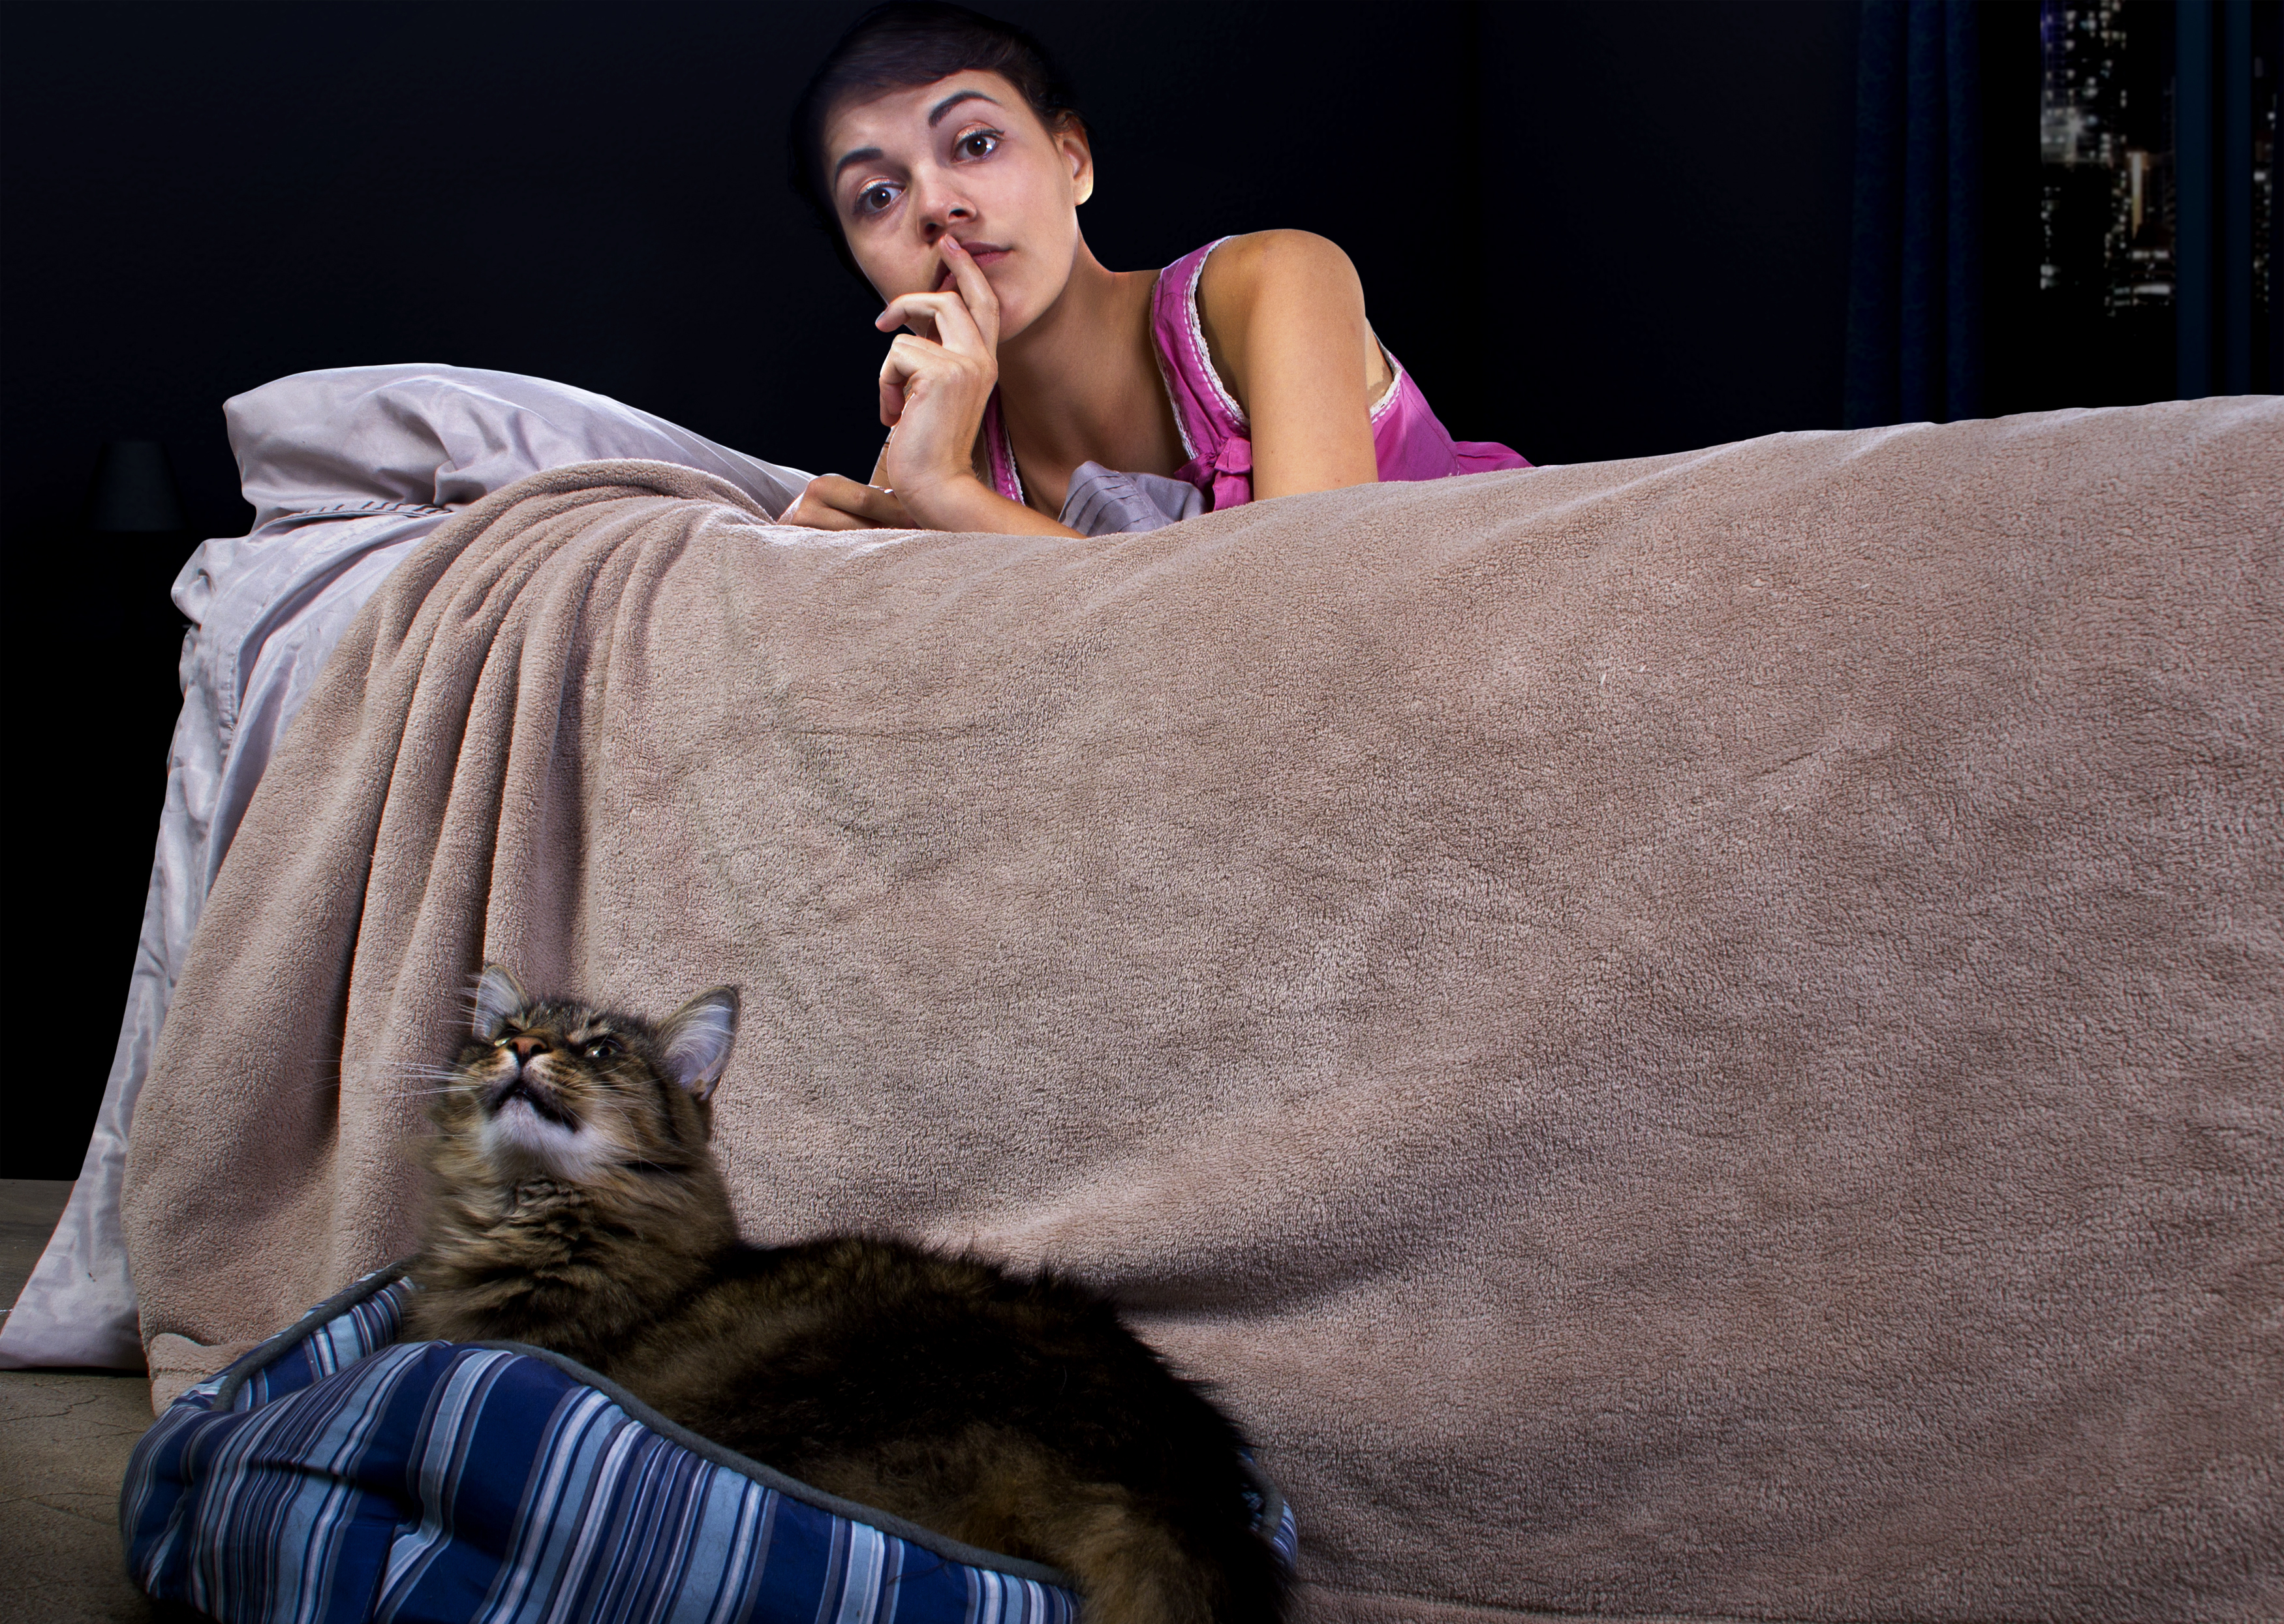 A sleepless woman in bed shushes a noisy cat sitting on the floor